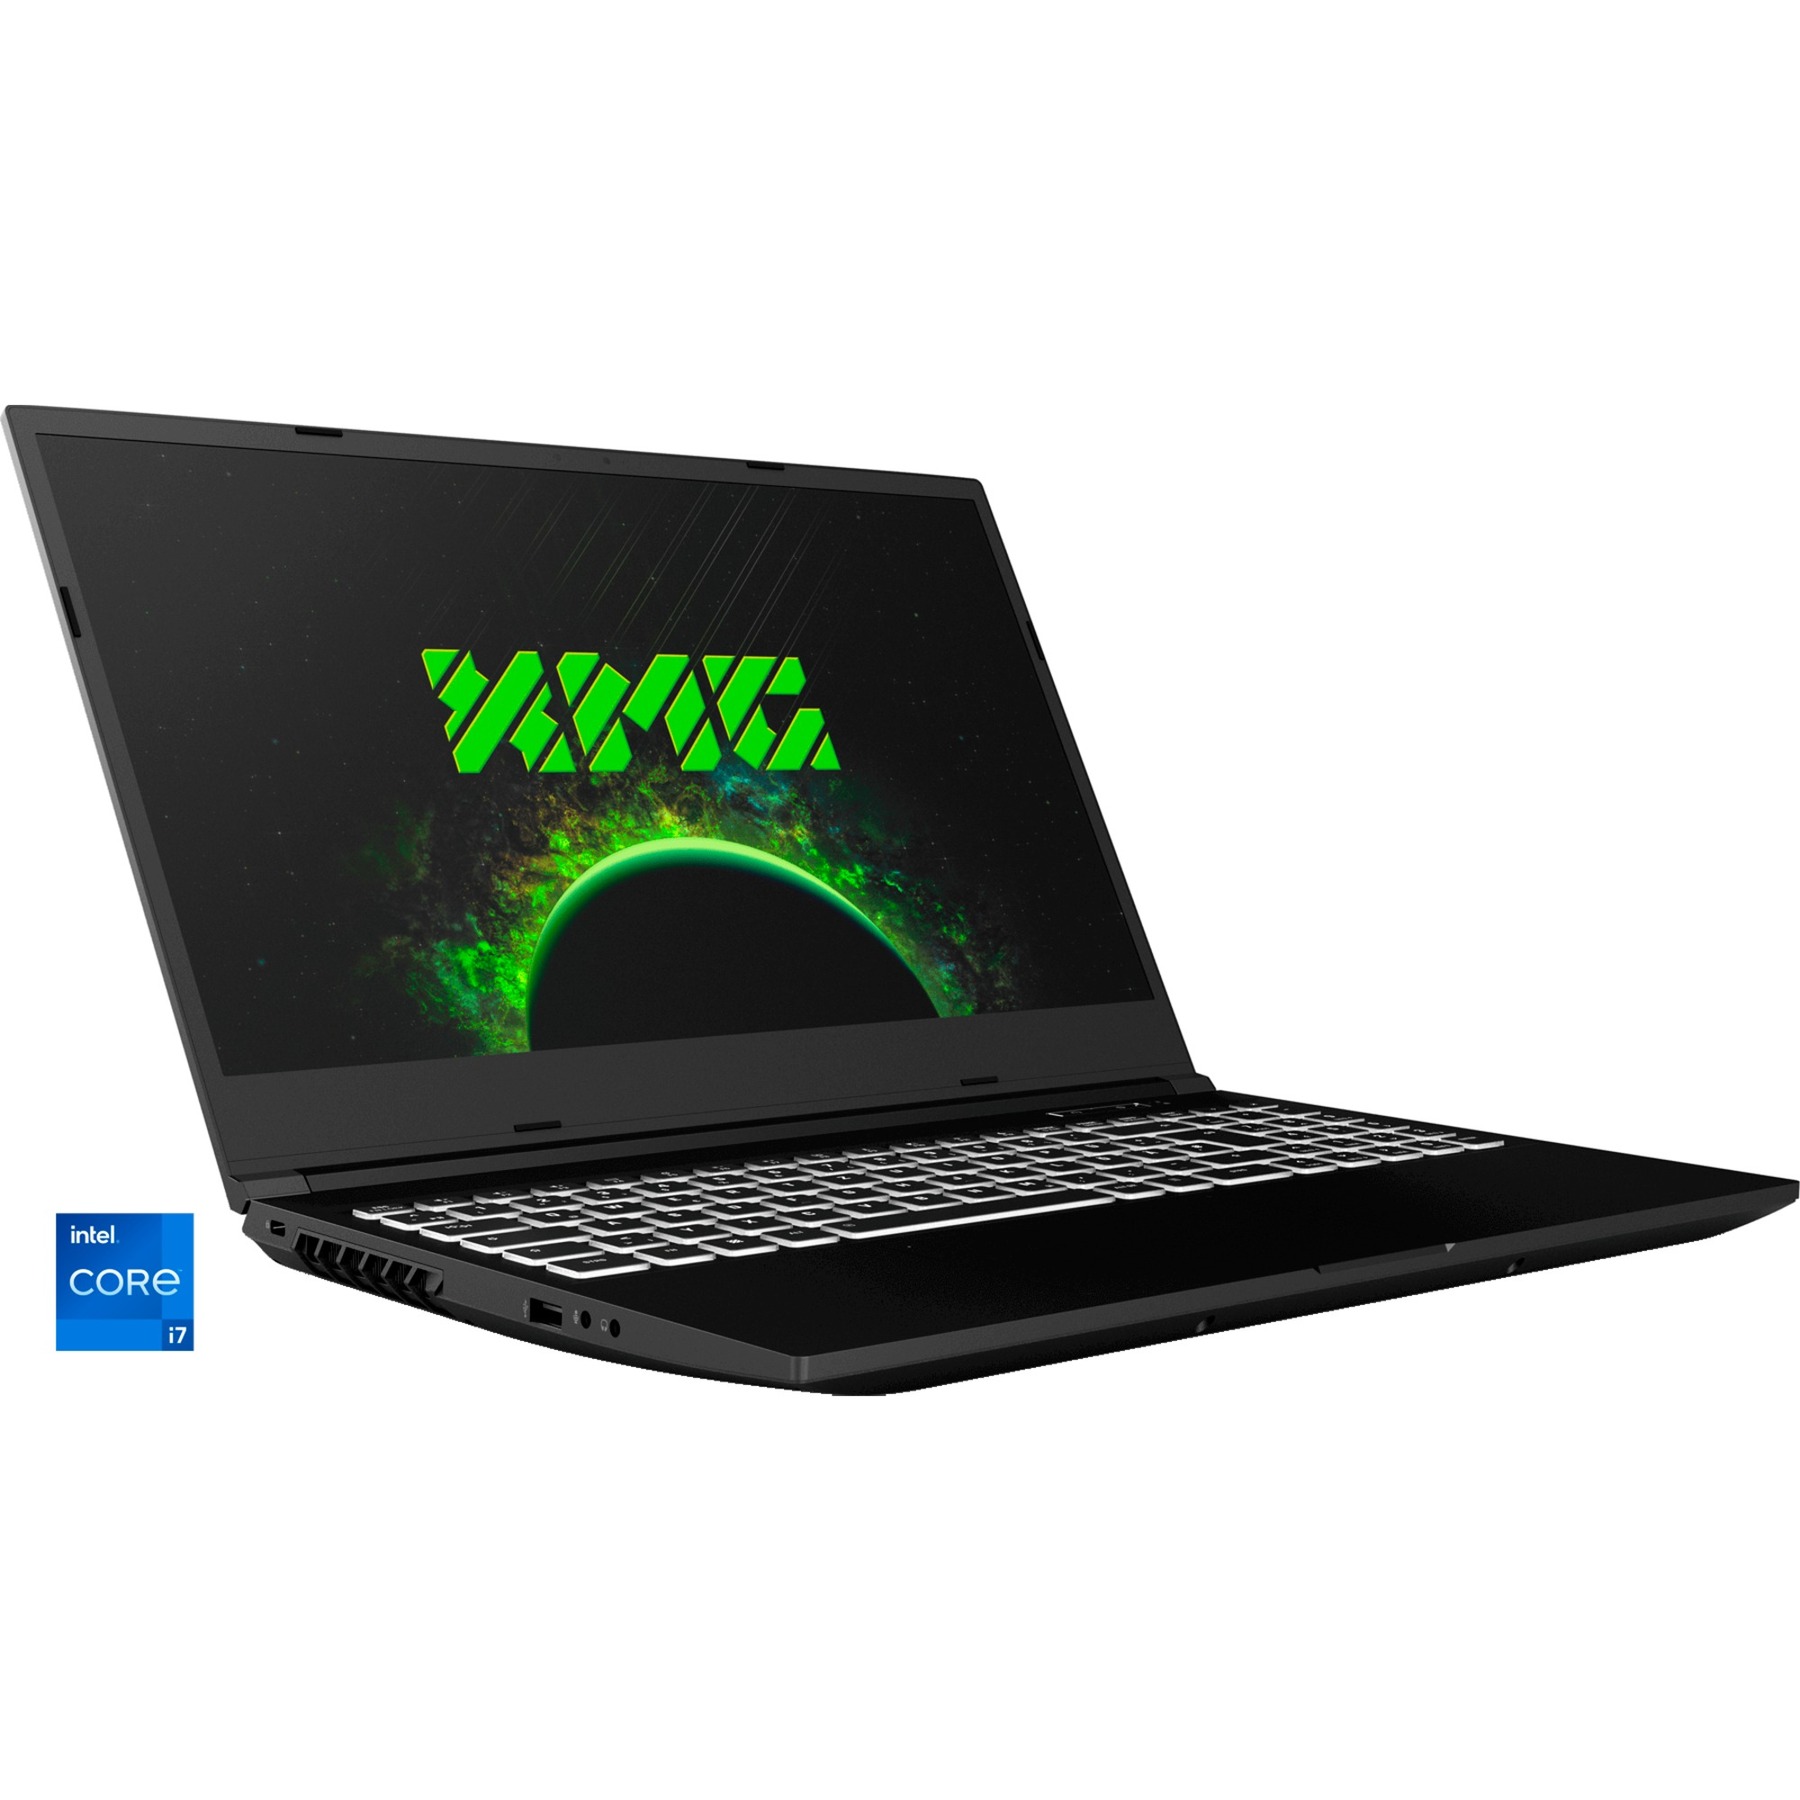 CORE 15 (10505851), Gaming-Notebook